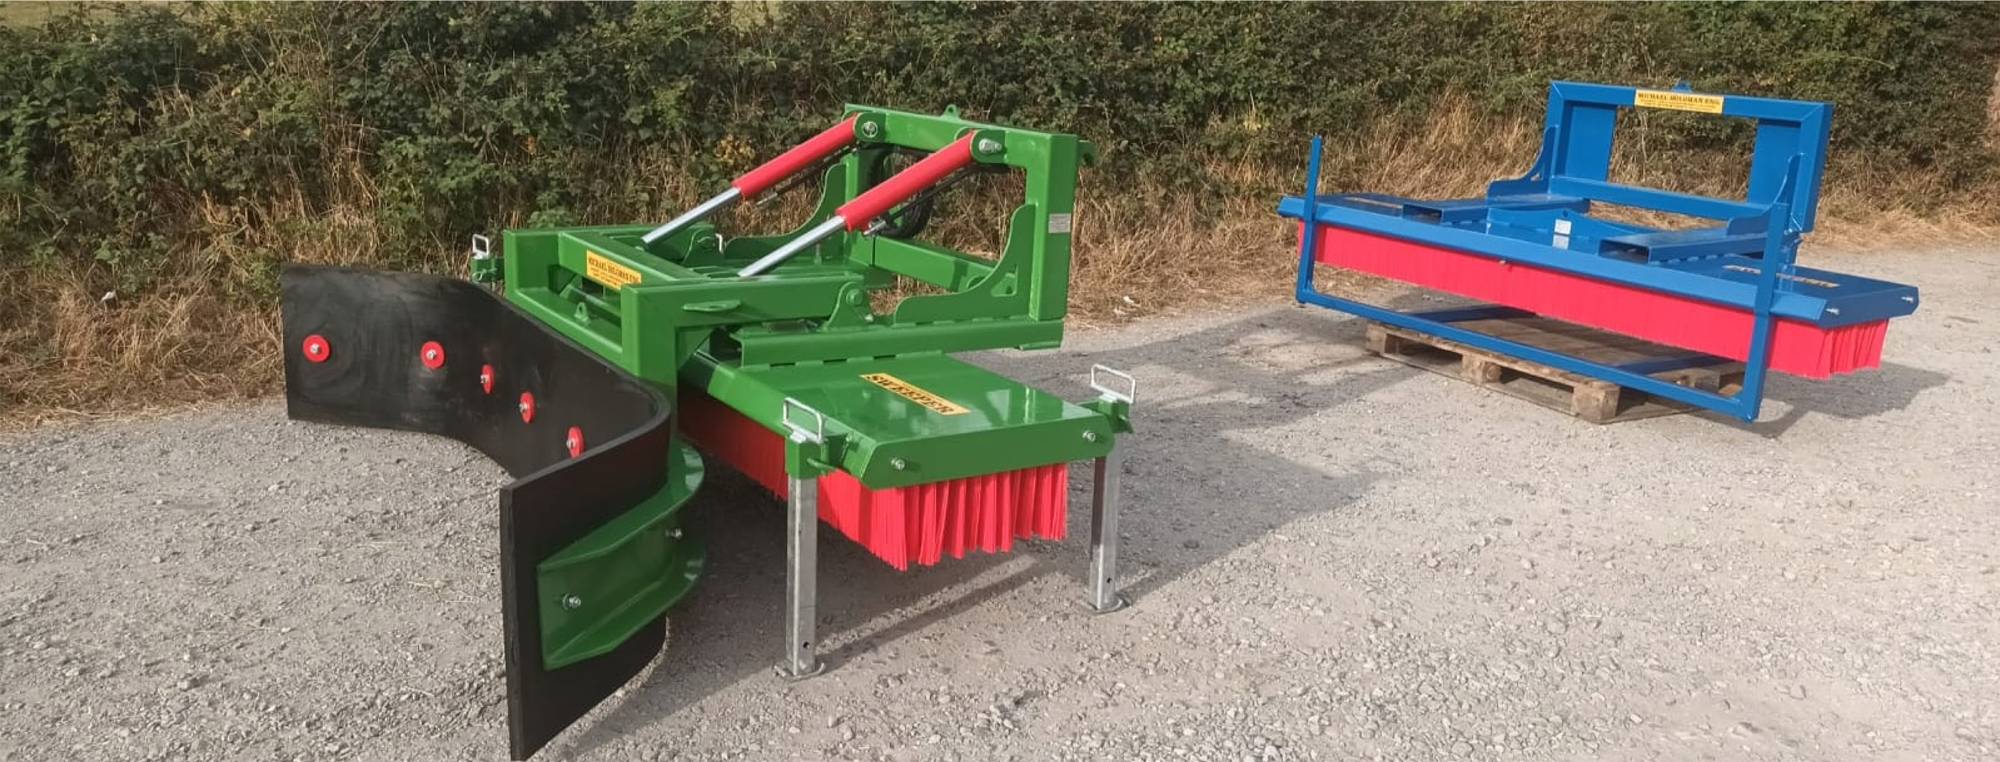 Sweeper with rubber scraper. Yard brush sweepers manufactured by Michael Holohan Engineering, Laois, Ireland